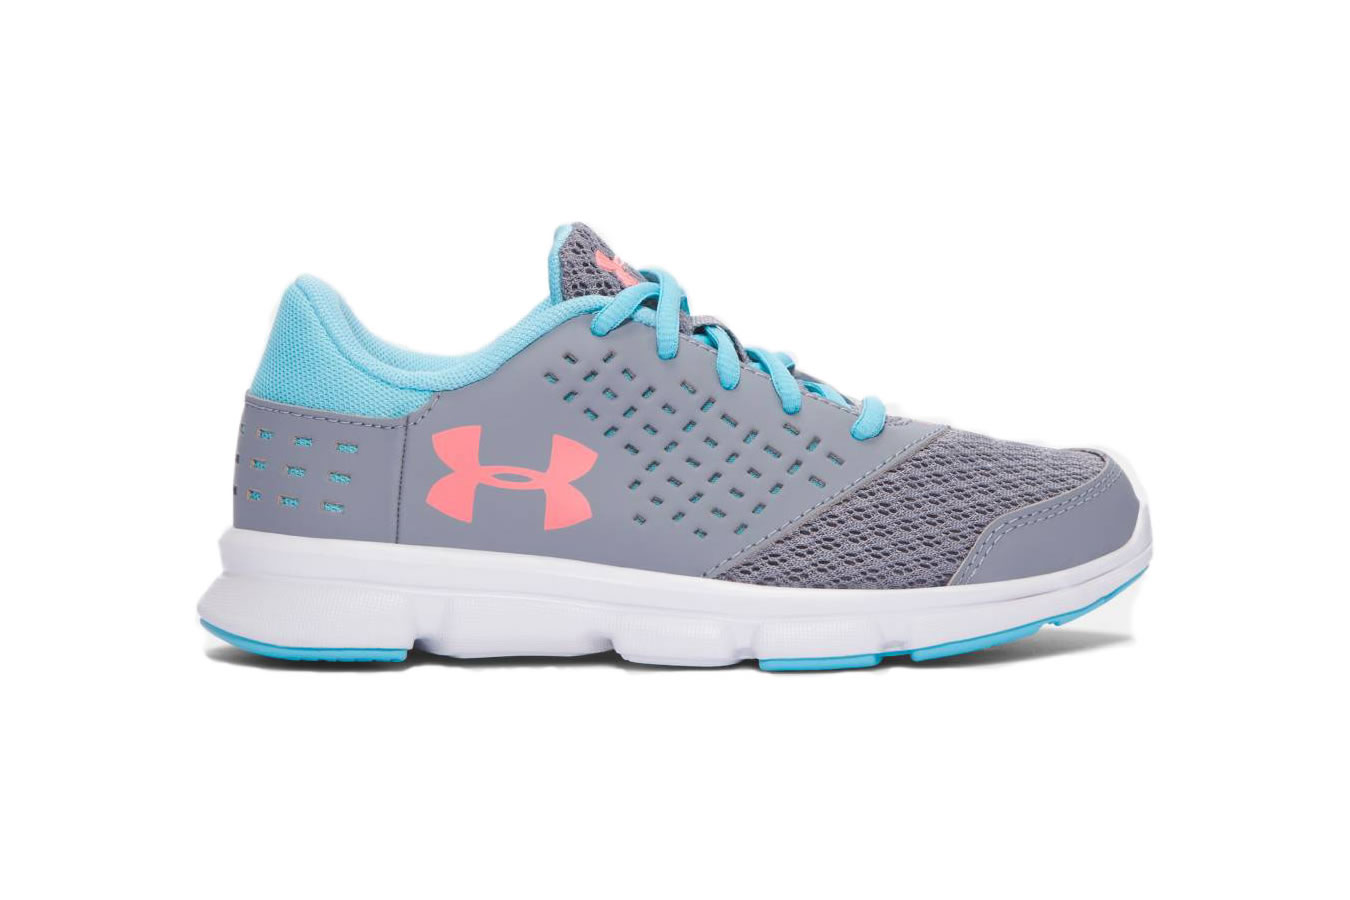 Under Armour Girl's GPS Rave Shoe | Vance Outdoors